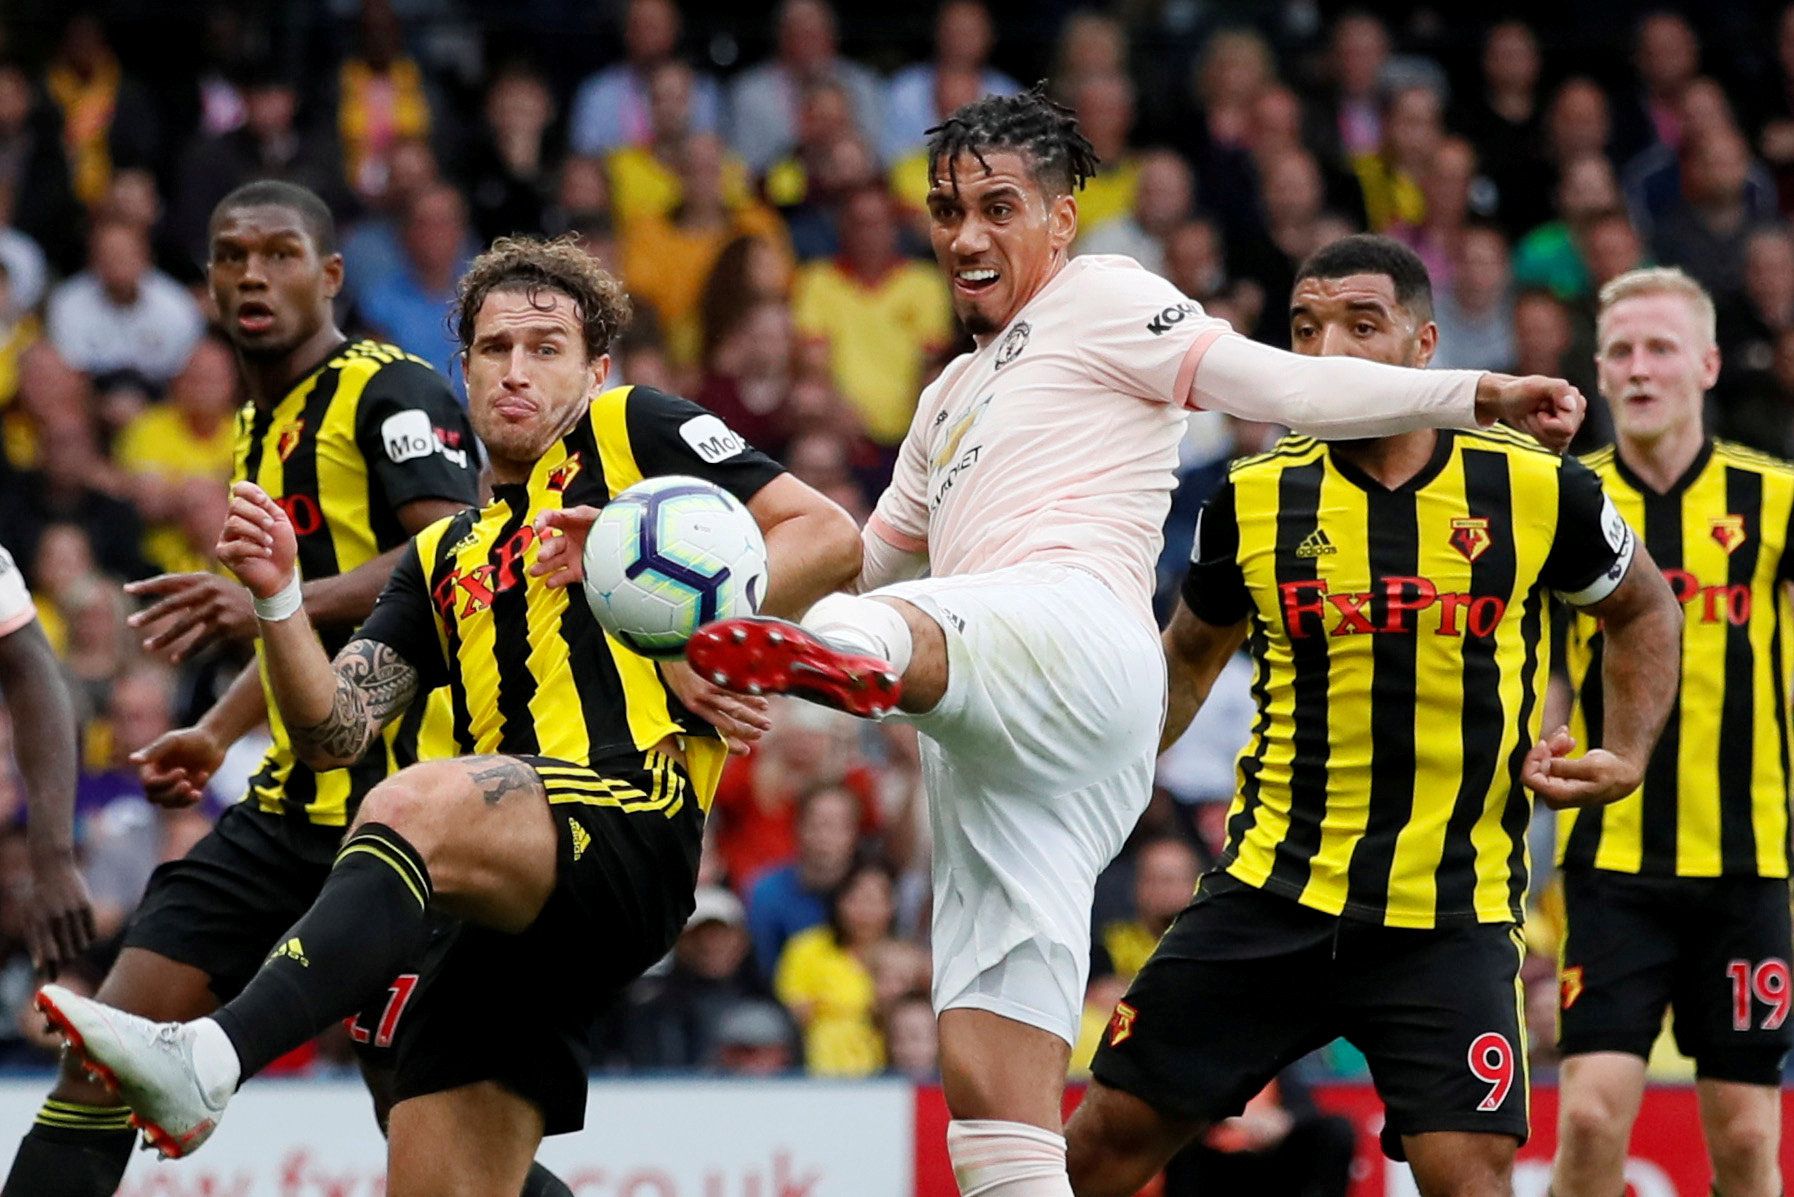 Soccer Football - Premier League - Watford v Manchester United - Vicarage Road, Watford, Britain - September 15, 2018  Manchester United's Chris Smalling scores their second goal   REUTERS/David Klein  EDITORIAL USE ONLY. No use with unauthorized audio, video, data, fixture lists, club/league logos or 